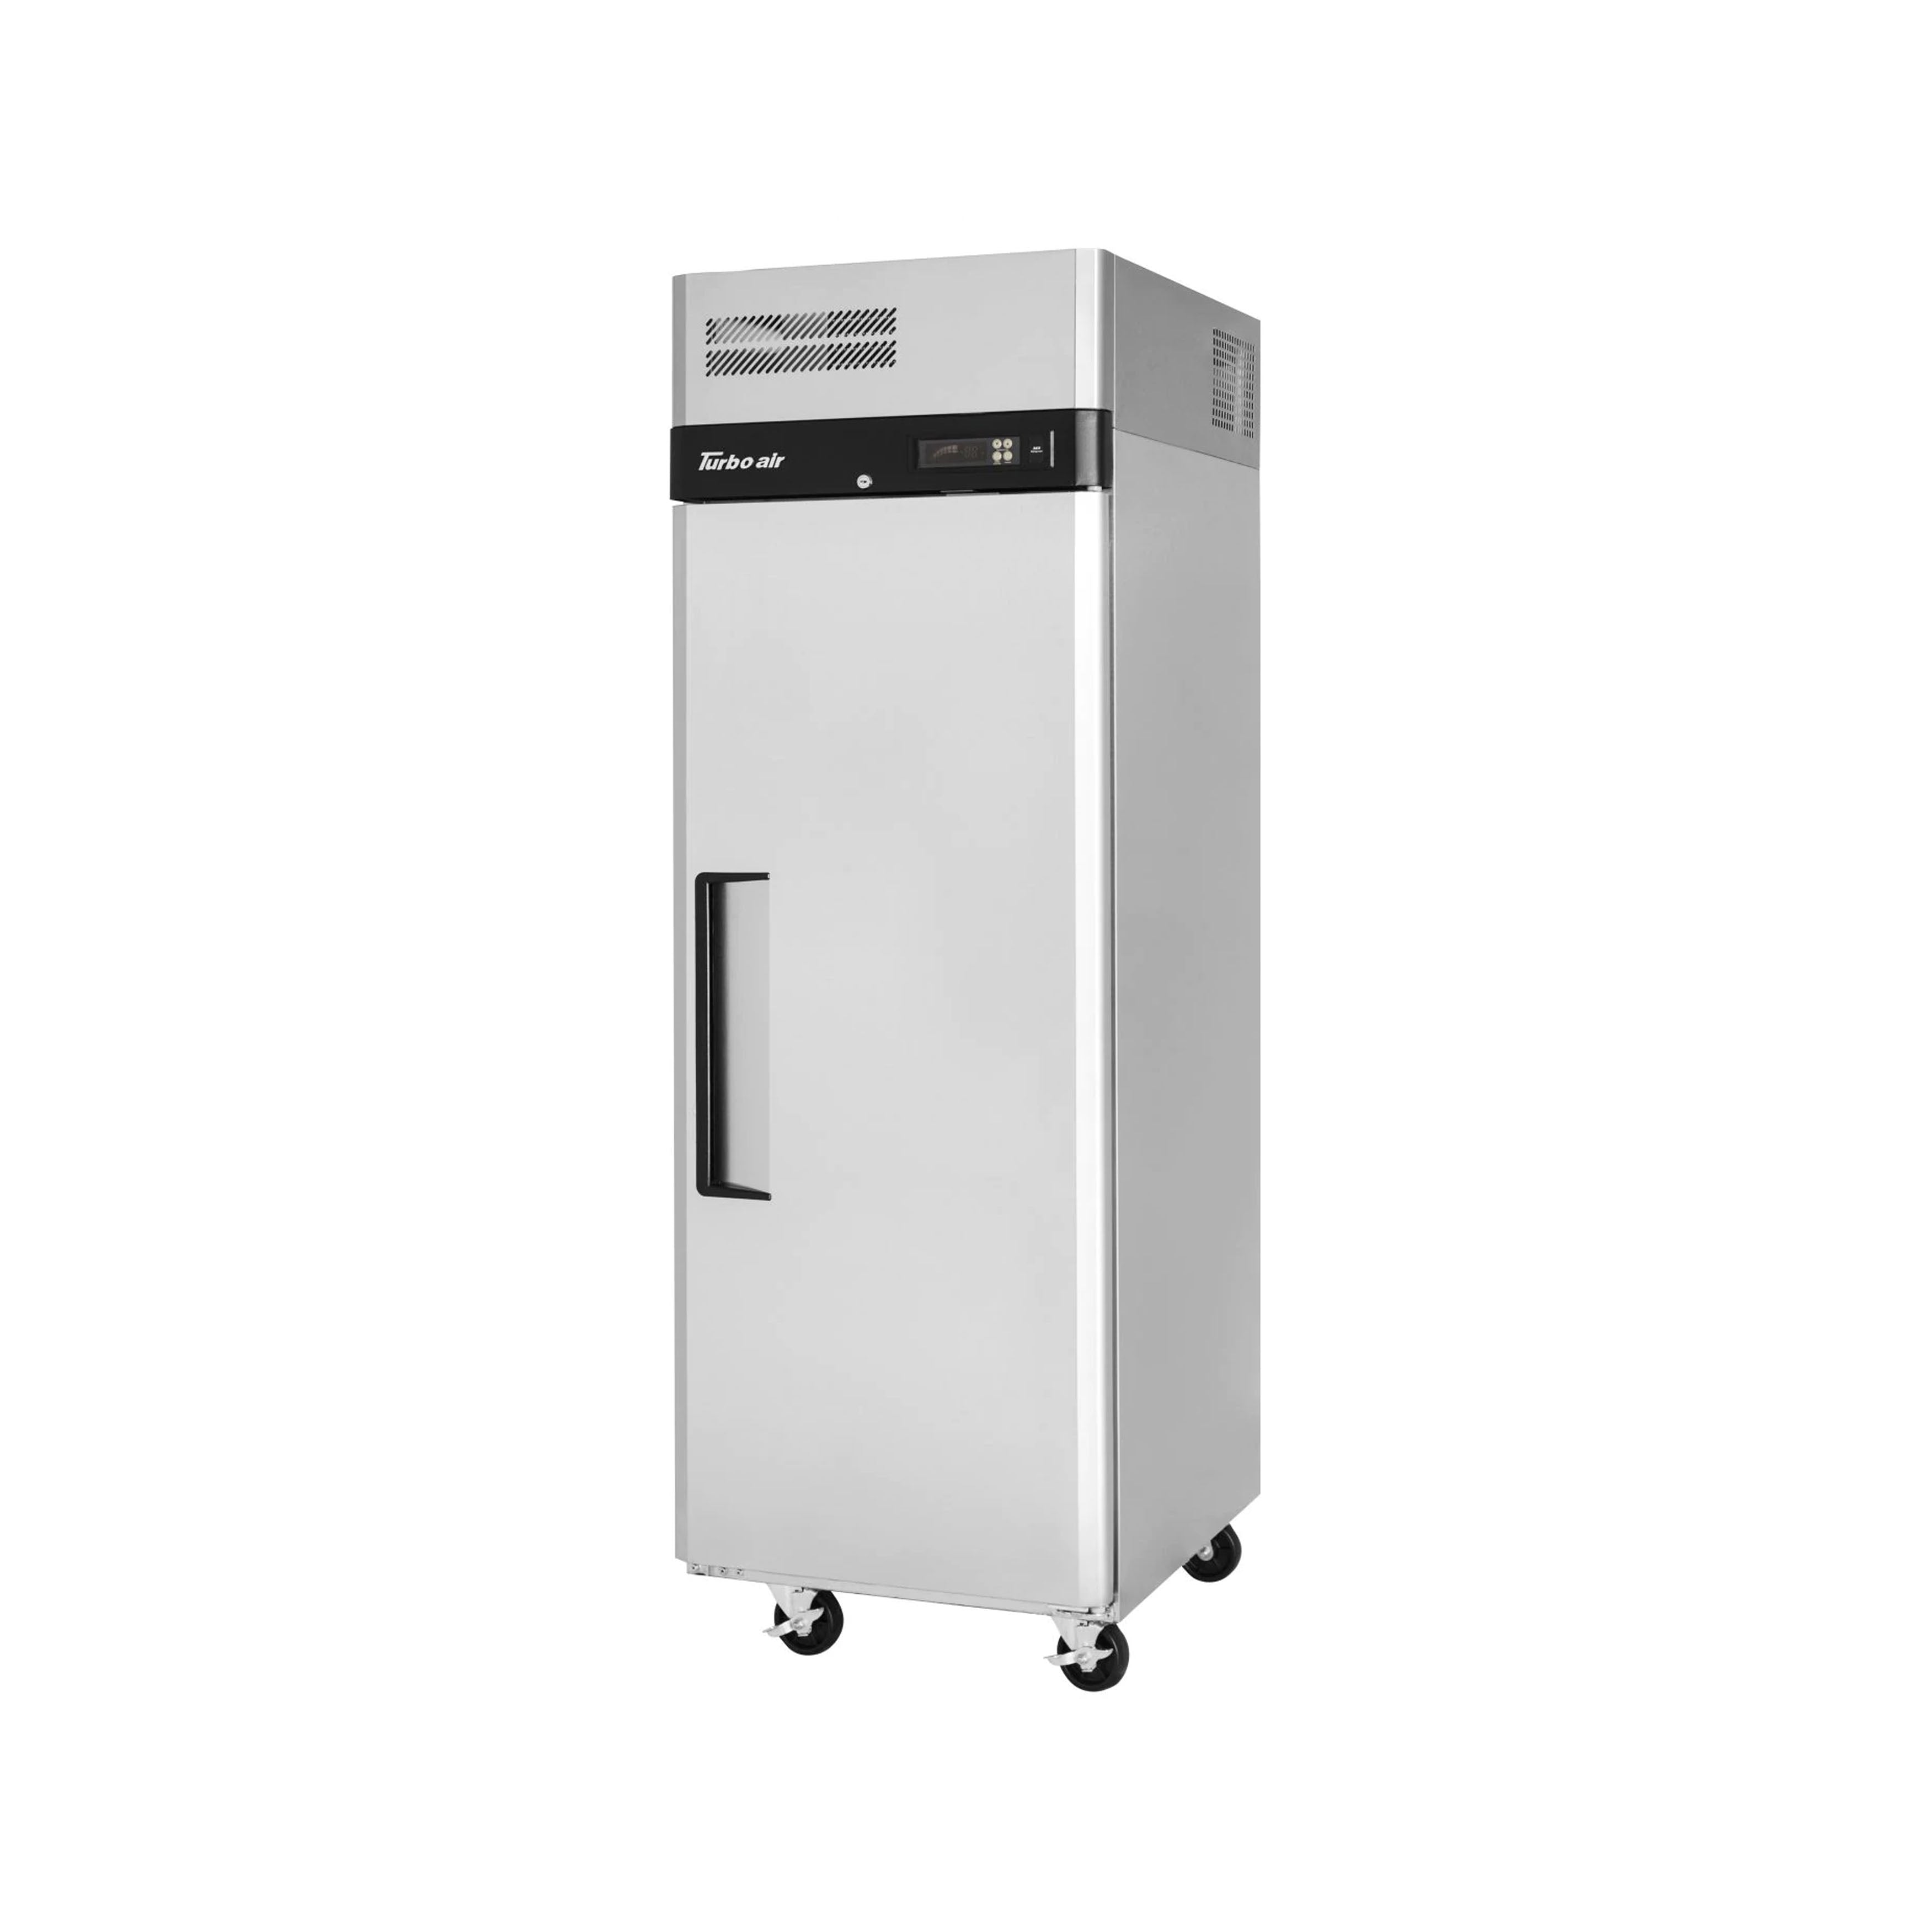 Turbo Air - M3R19-1-N, Commercial 25" Reach-in Refrigerator M3 Series Stainless Steel 18.7 cu.ft.